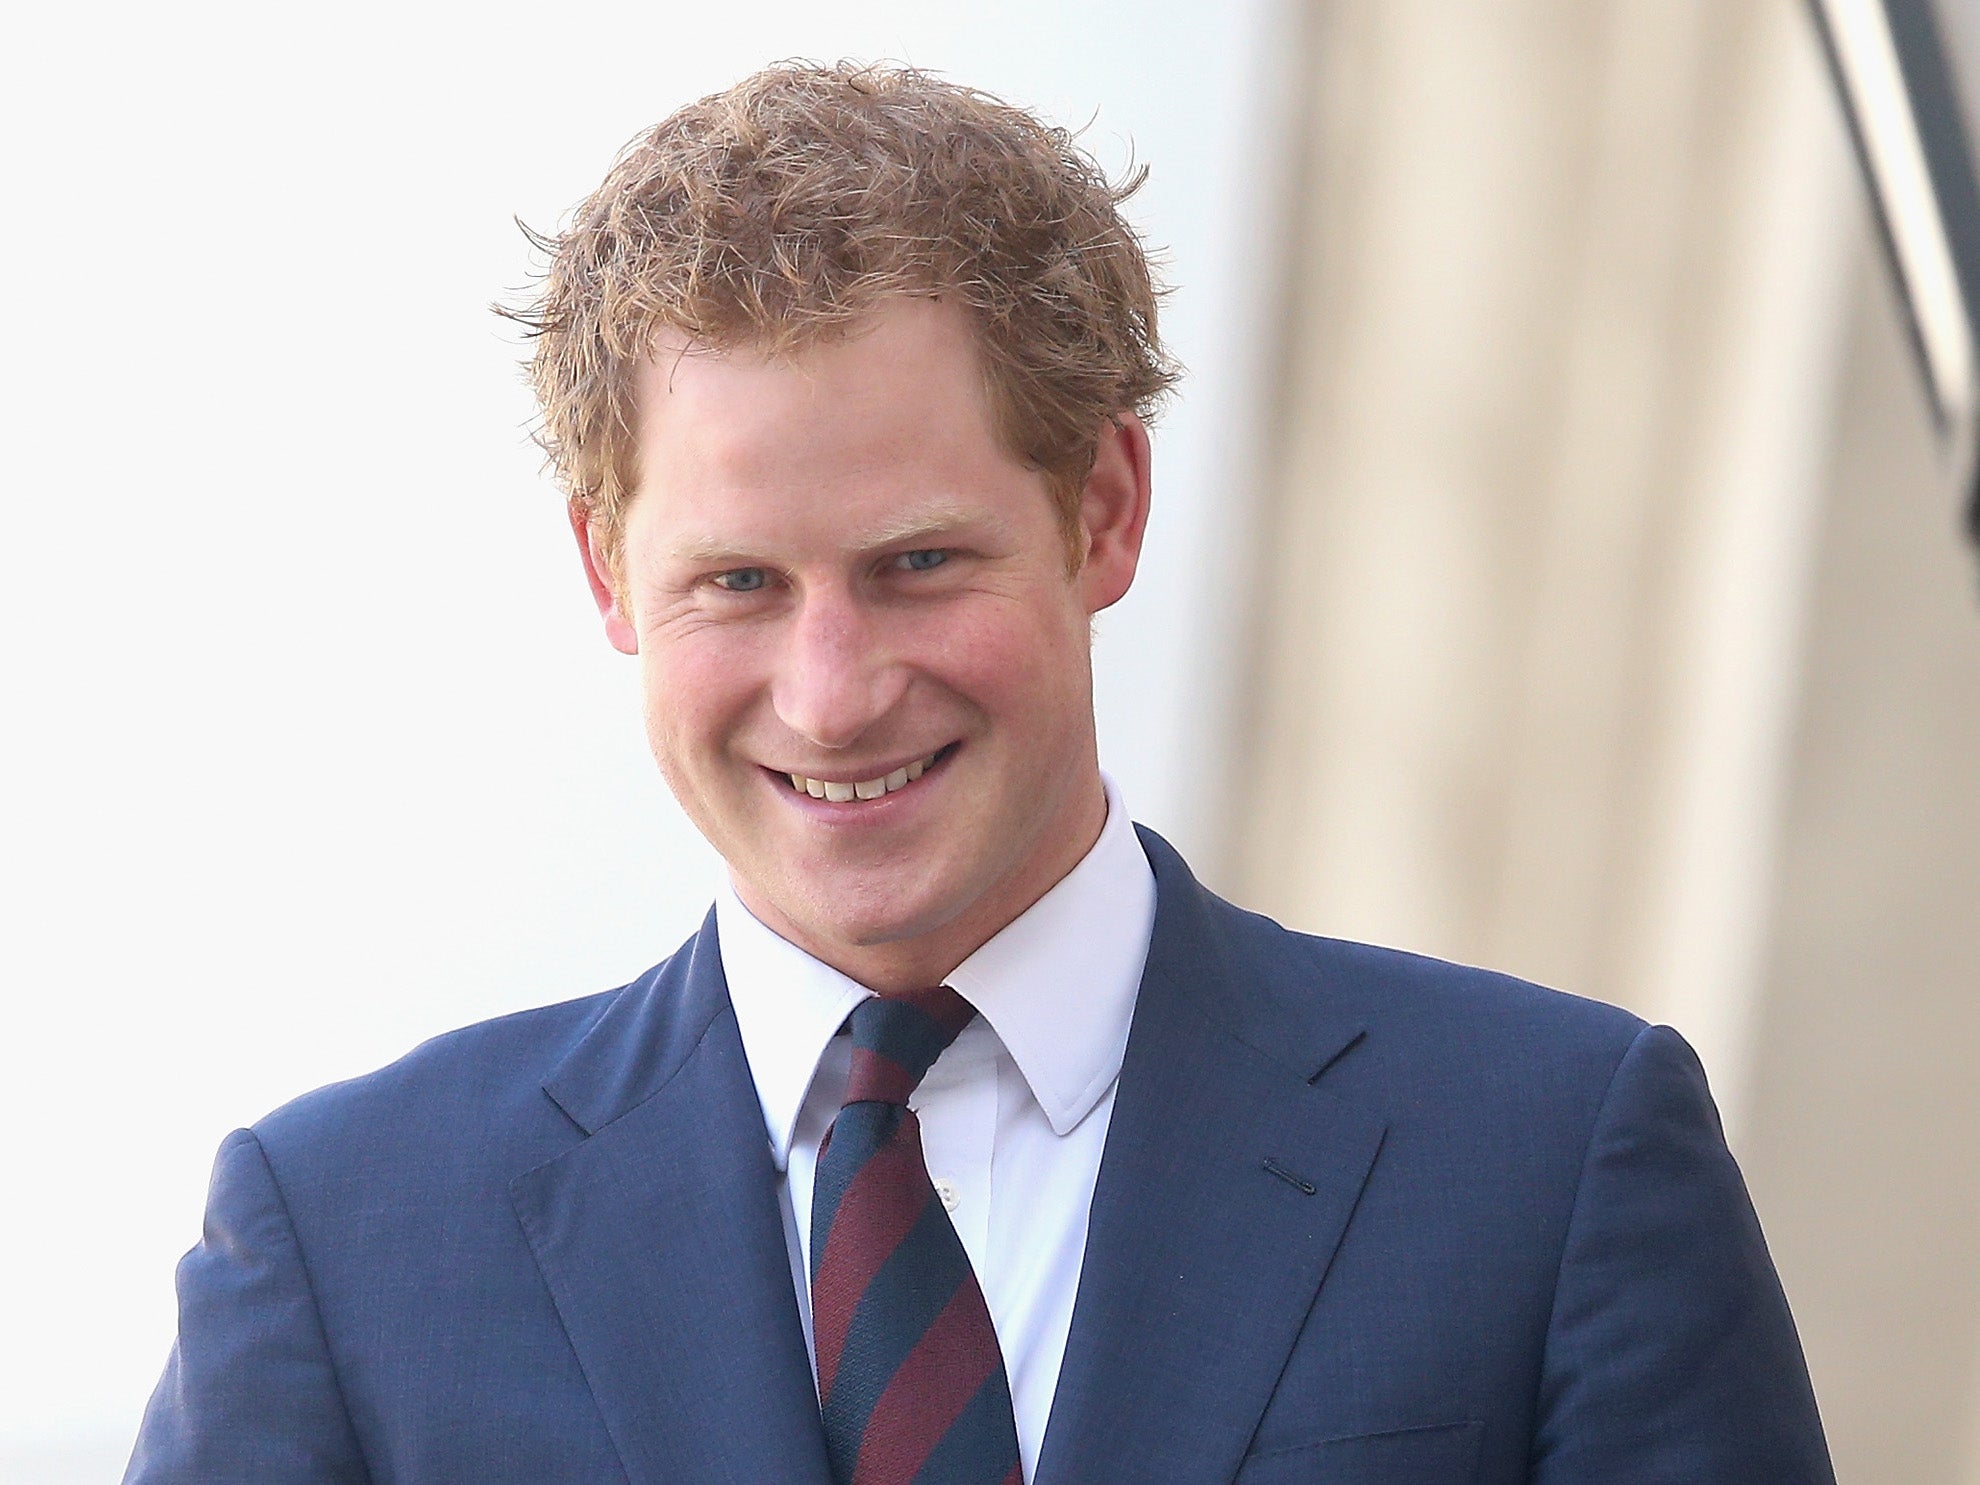 Prince Harry "can't wait" to meet his new niece